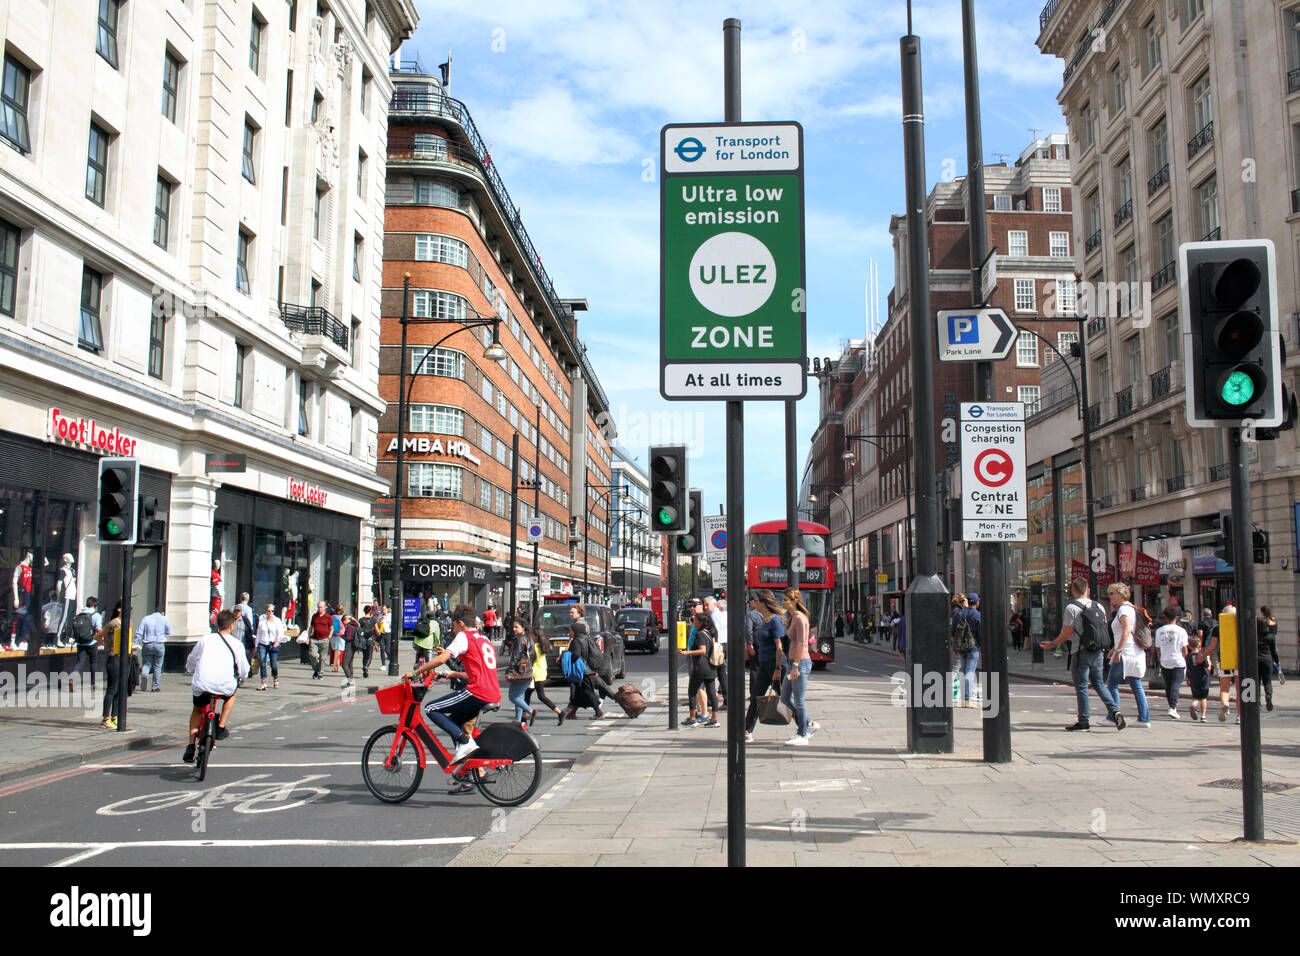 An Ultra low emission zone (ULEZ) boundary sign at the Marble Arch end of Oxford Street, London. Stock Photo